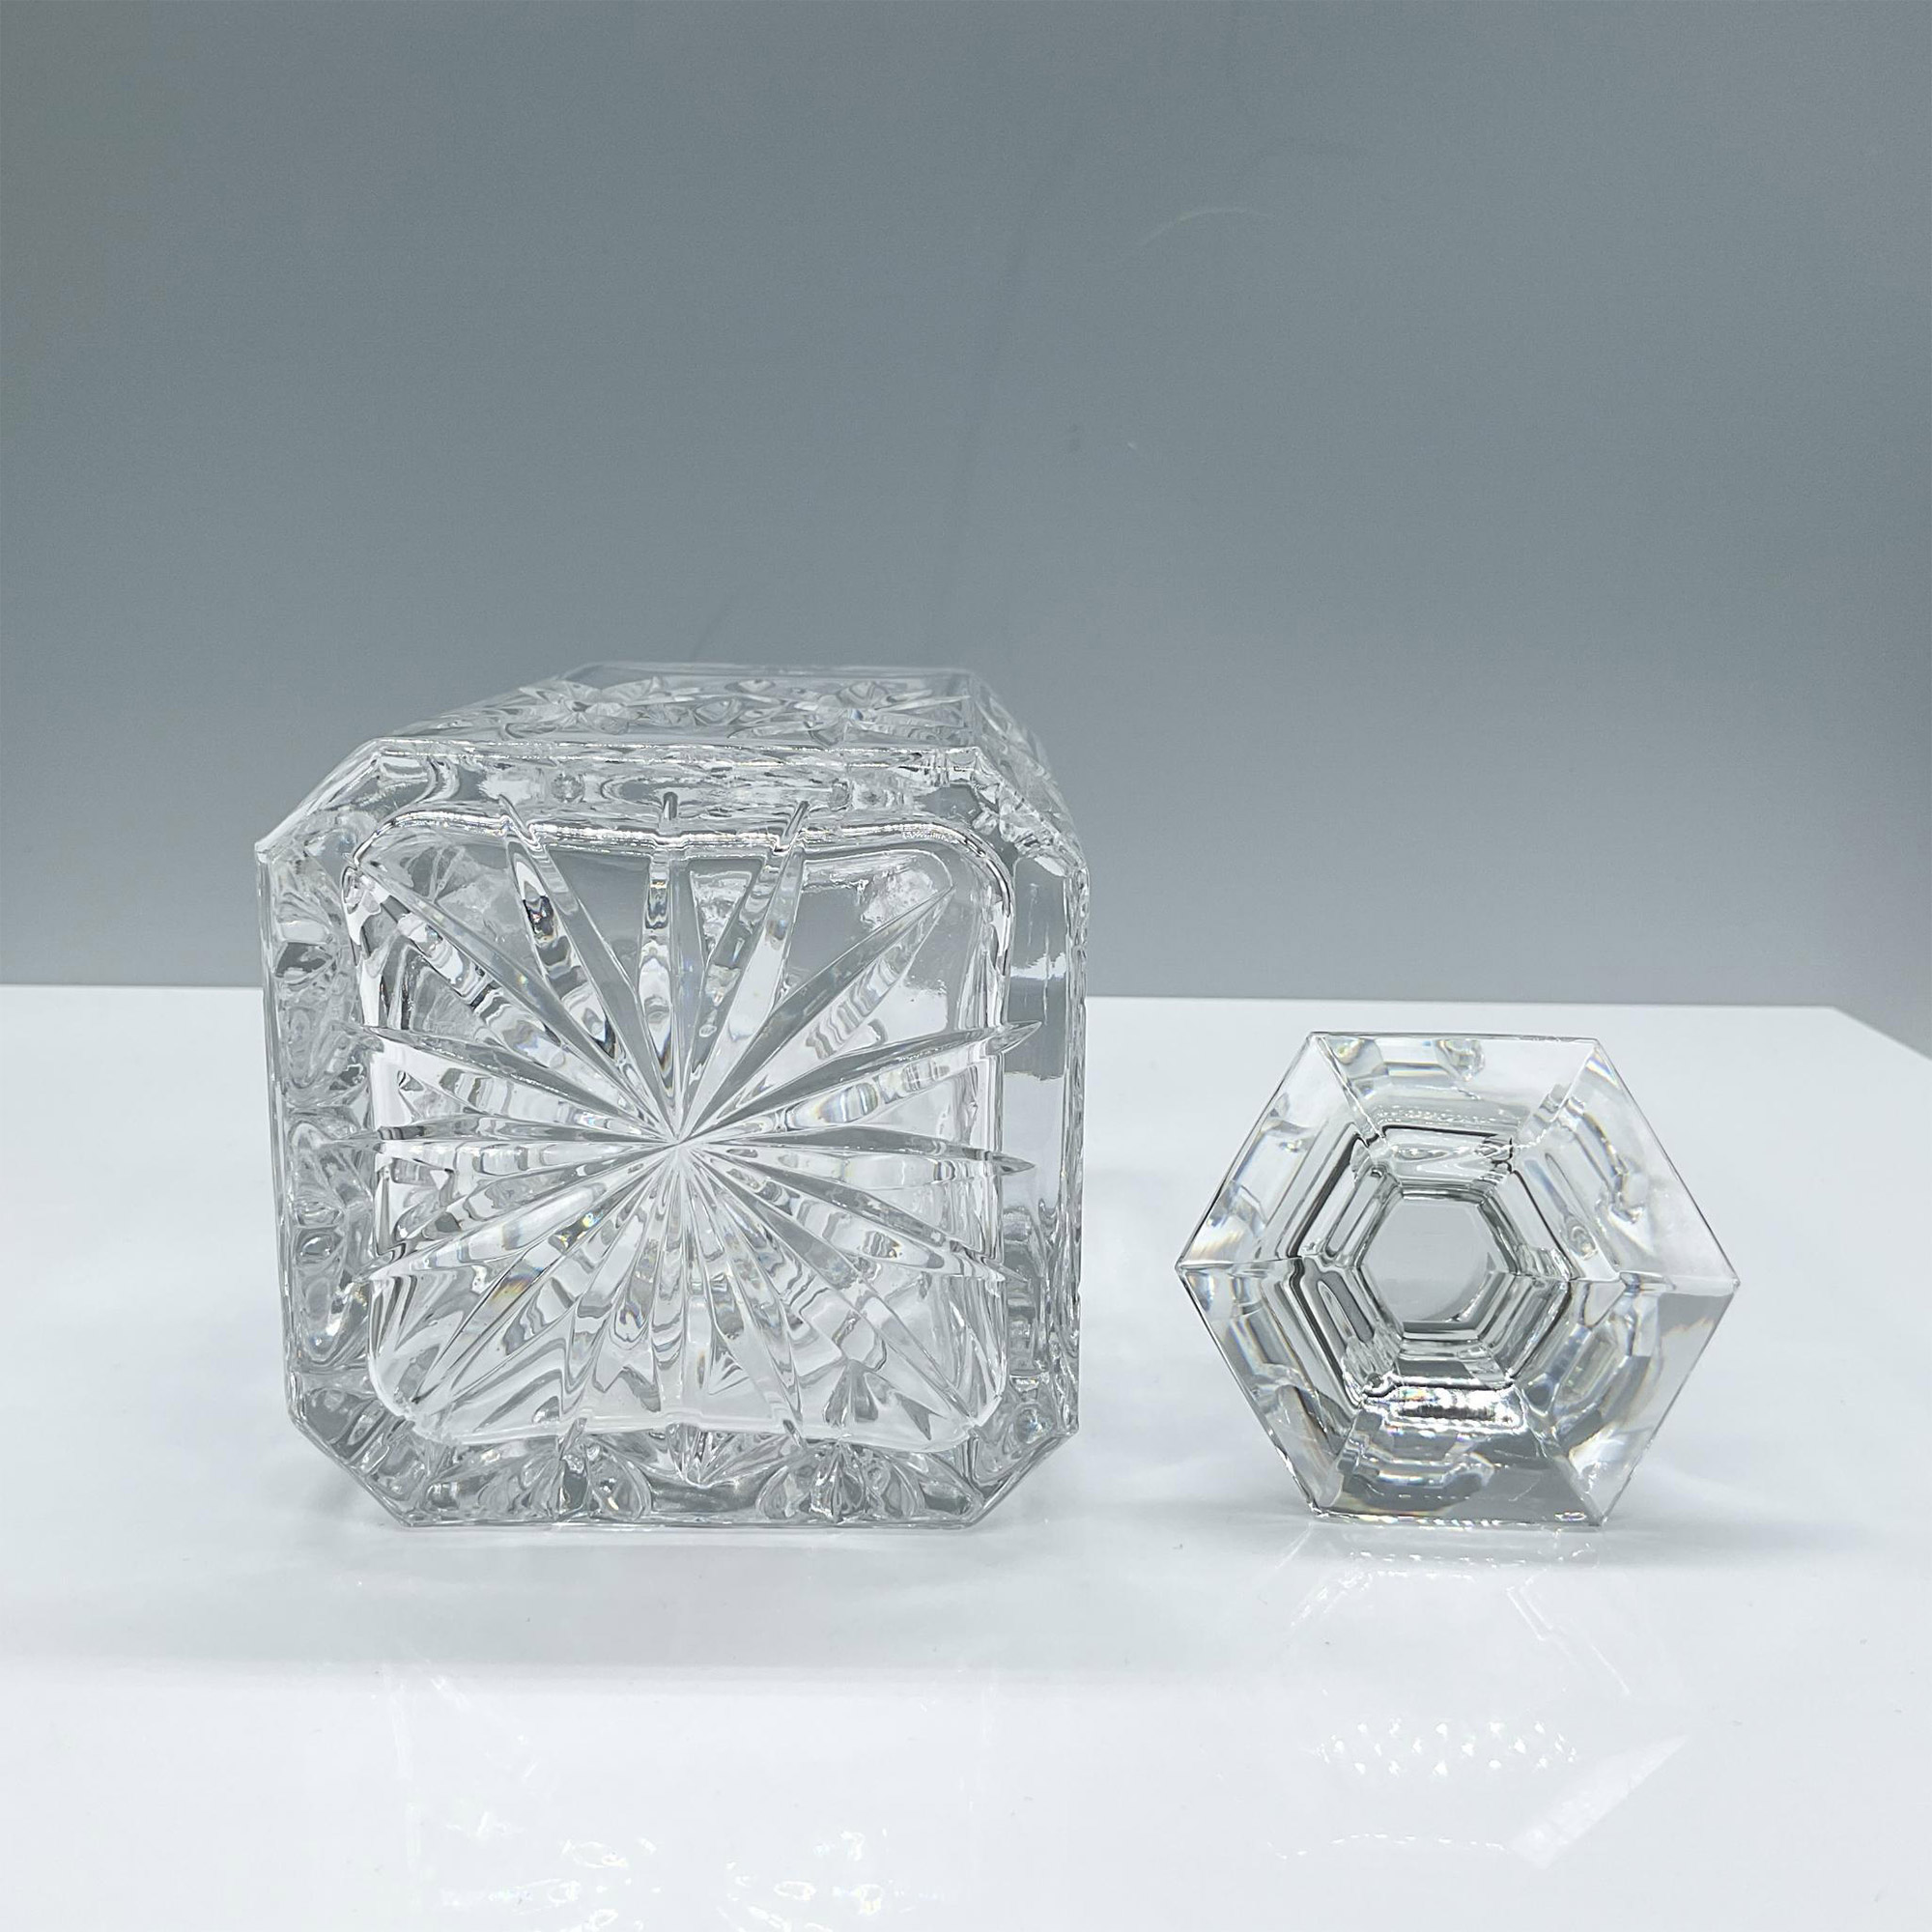 Tiffany & Co Crystal Whiskey Decanter with Stopper - Image 3 of 4